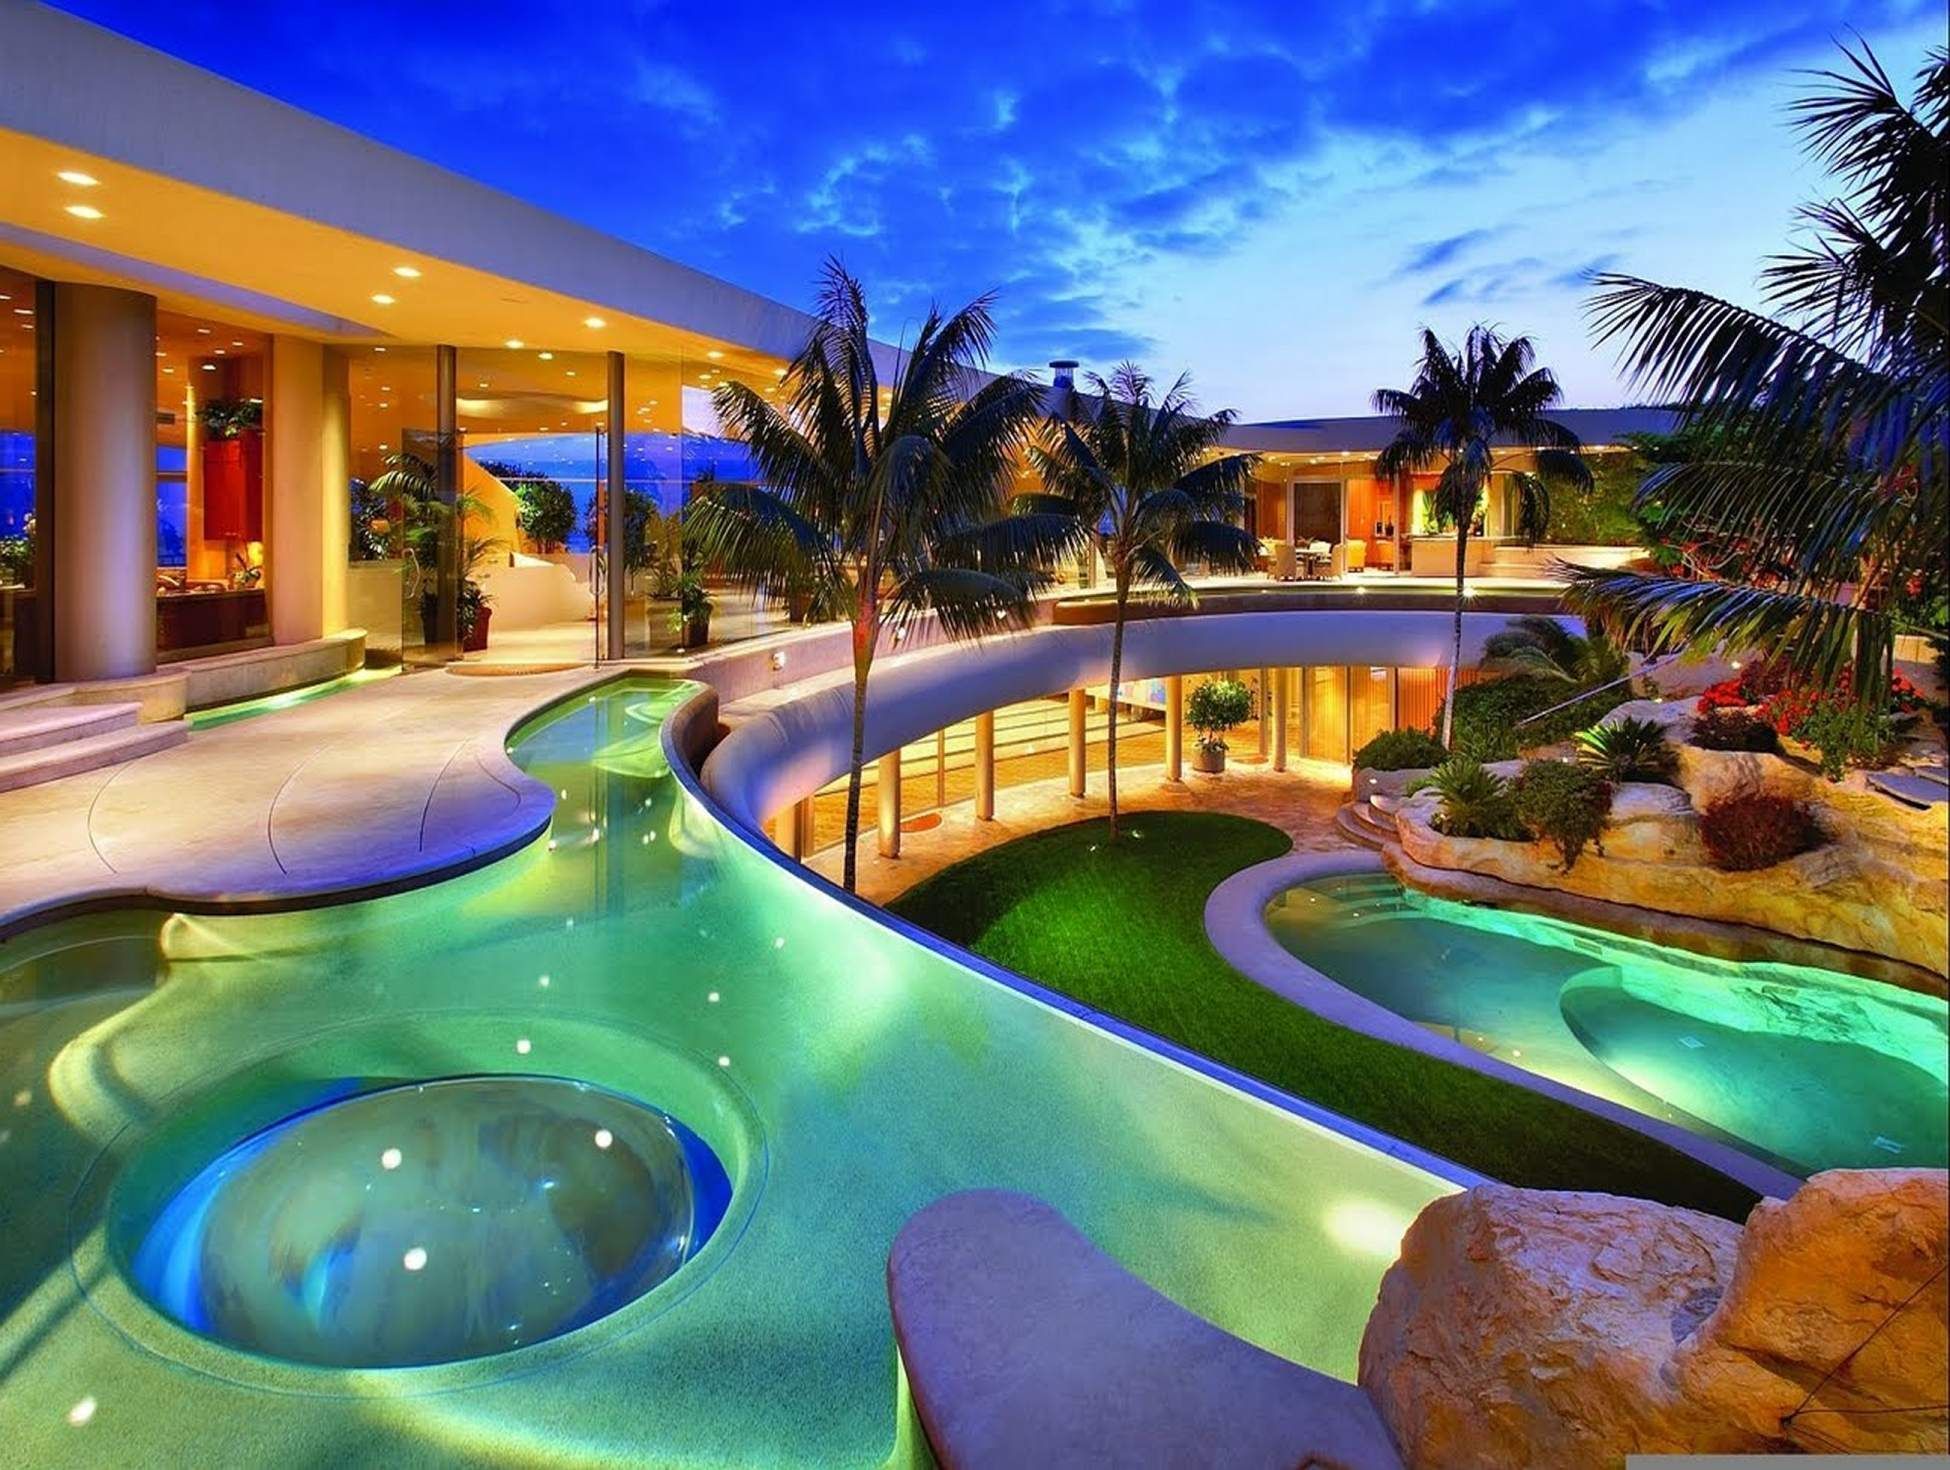 The Best Design Of Big Mansion With Pool For Your Modern House ...